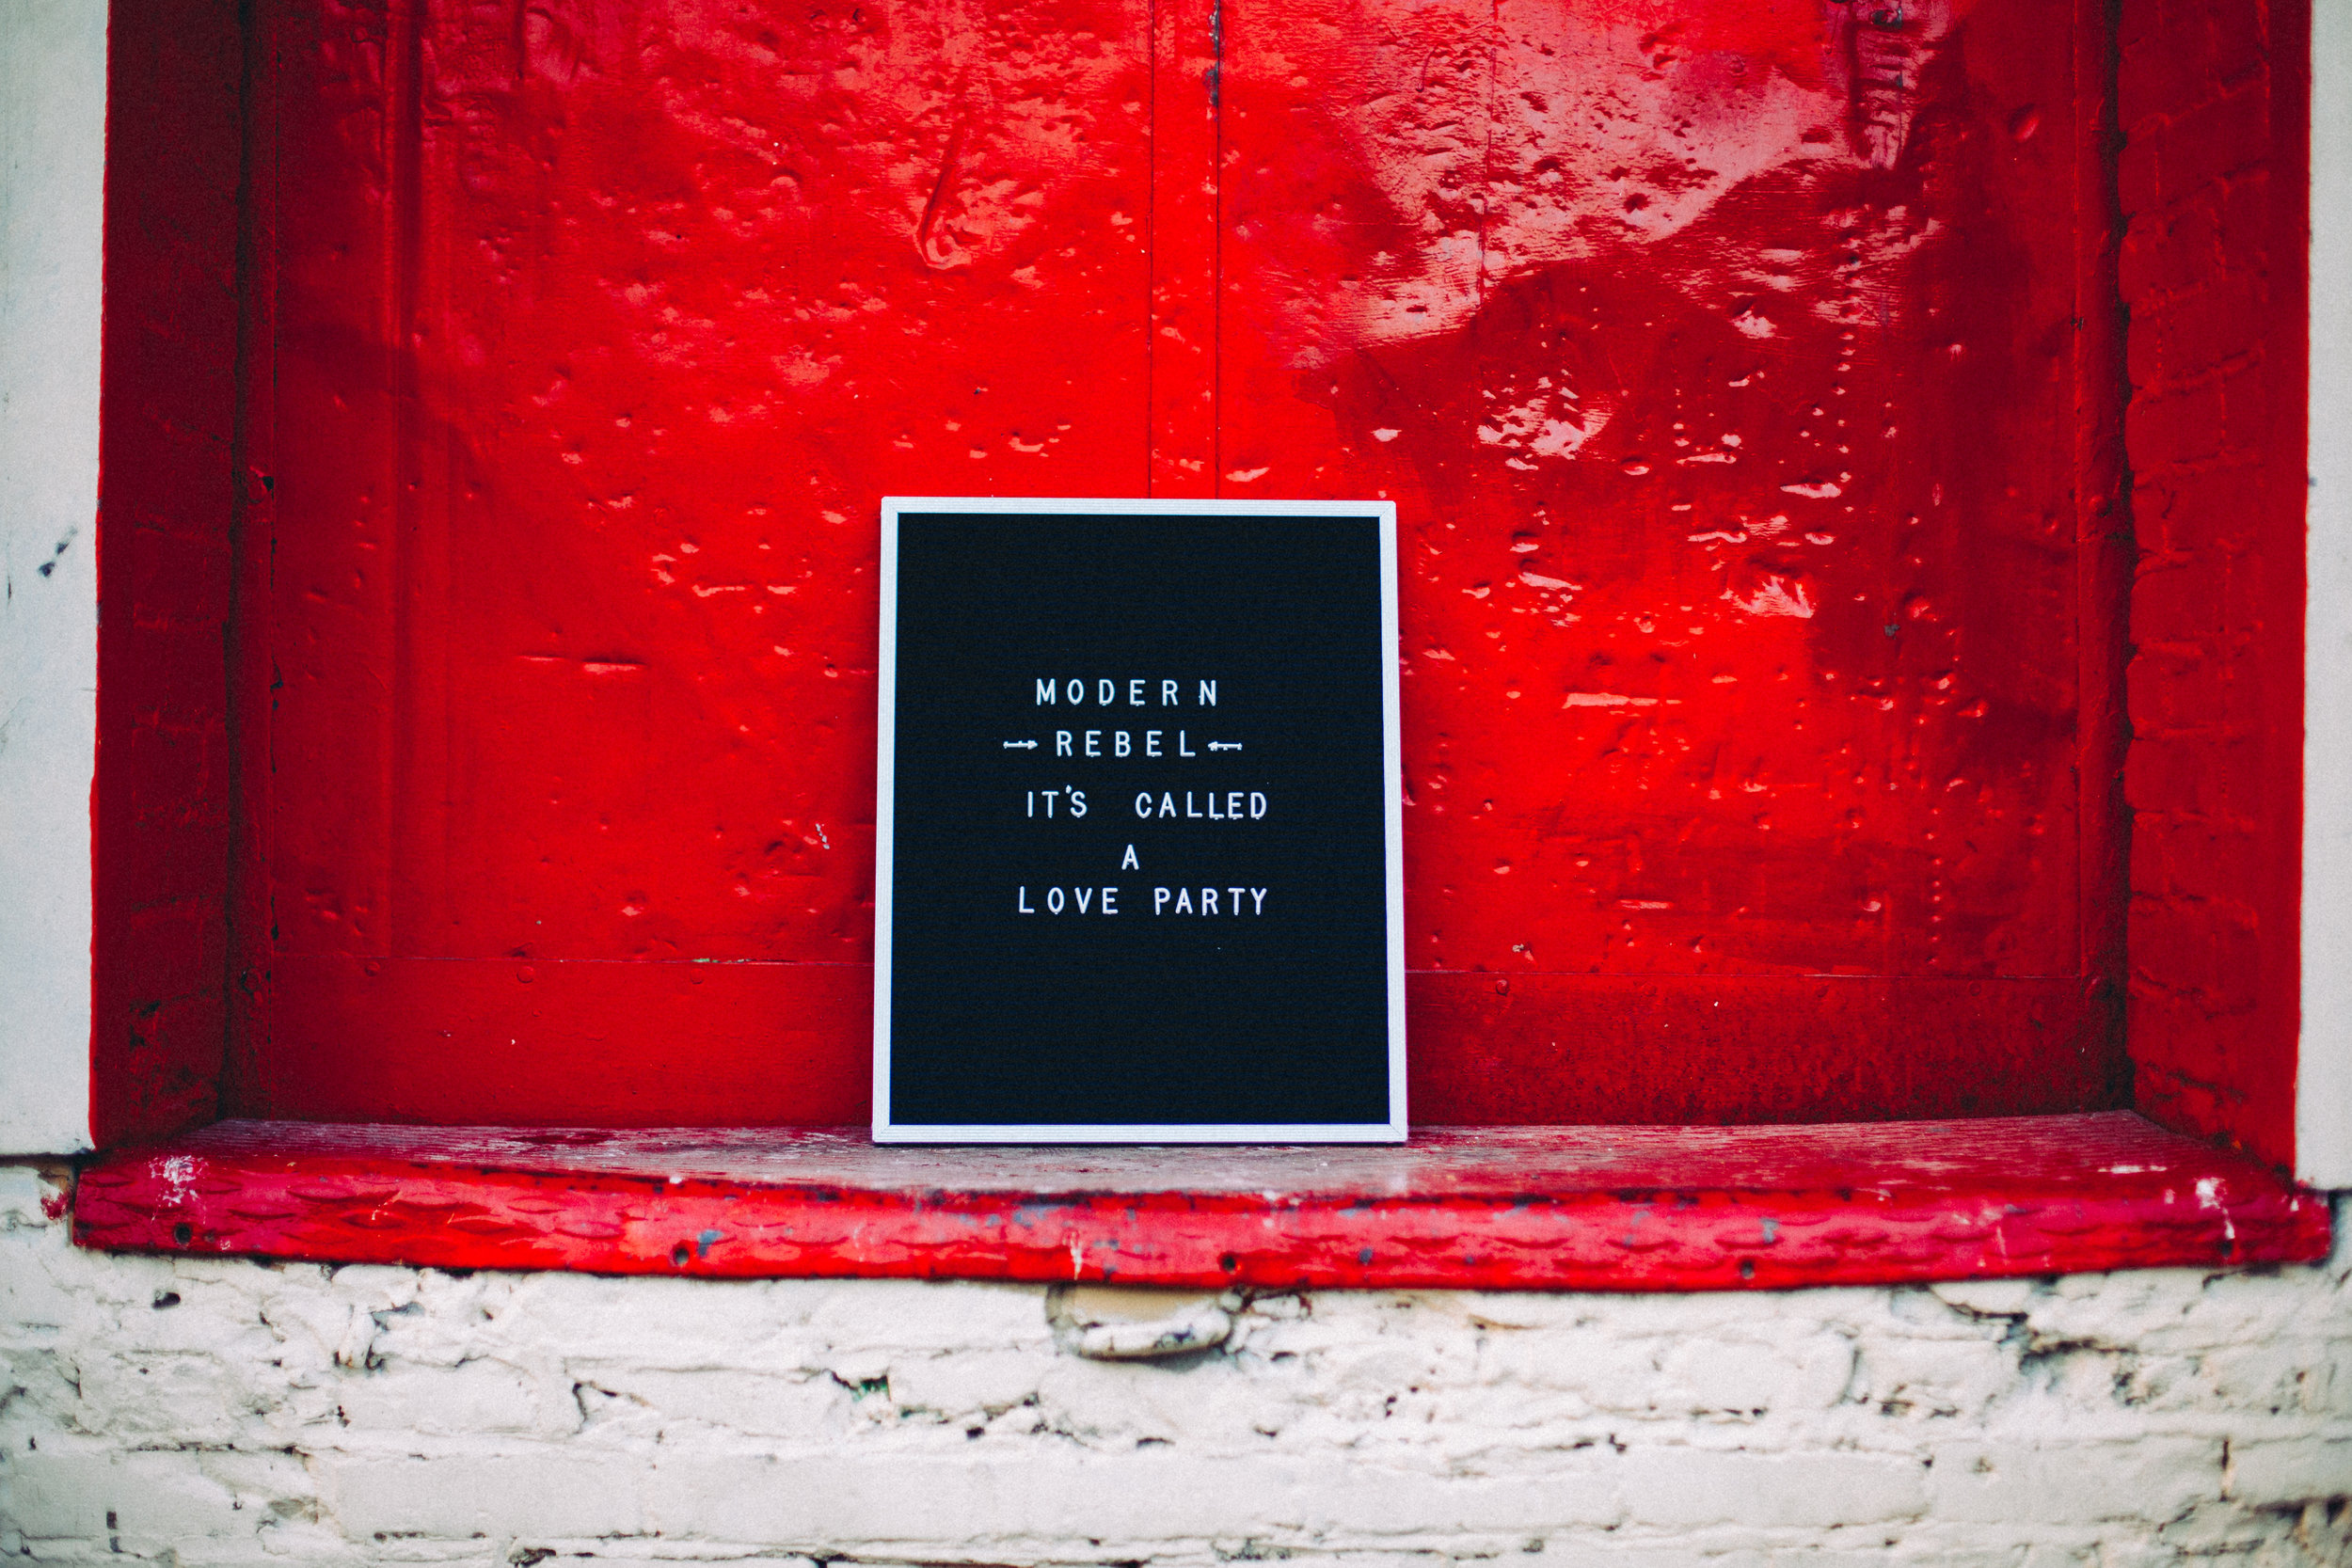 A letterboard sign saying "Modern Rebel - it's called a Love Party" sitting against a bright red doorway.